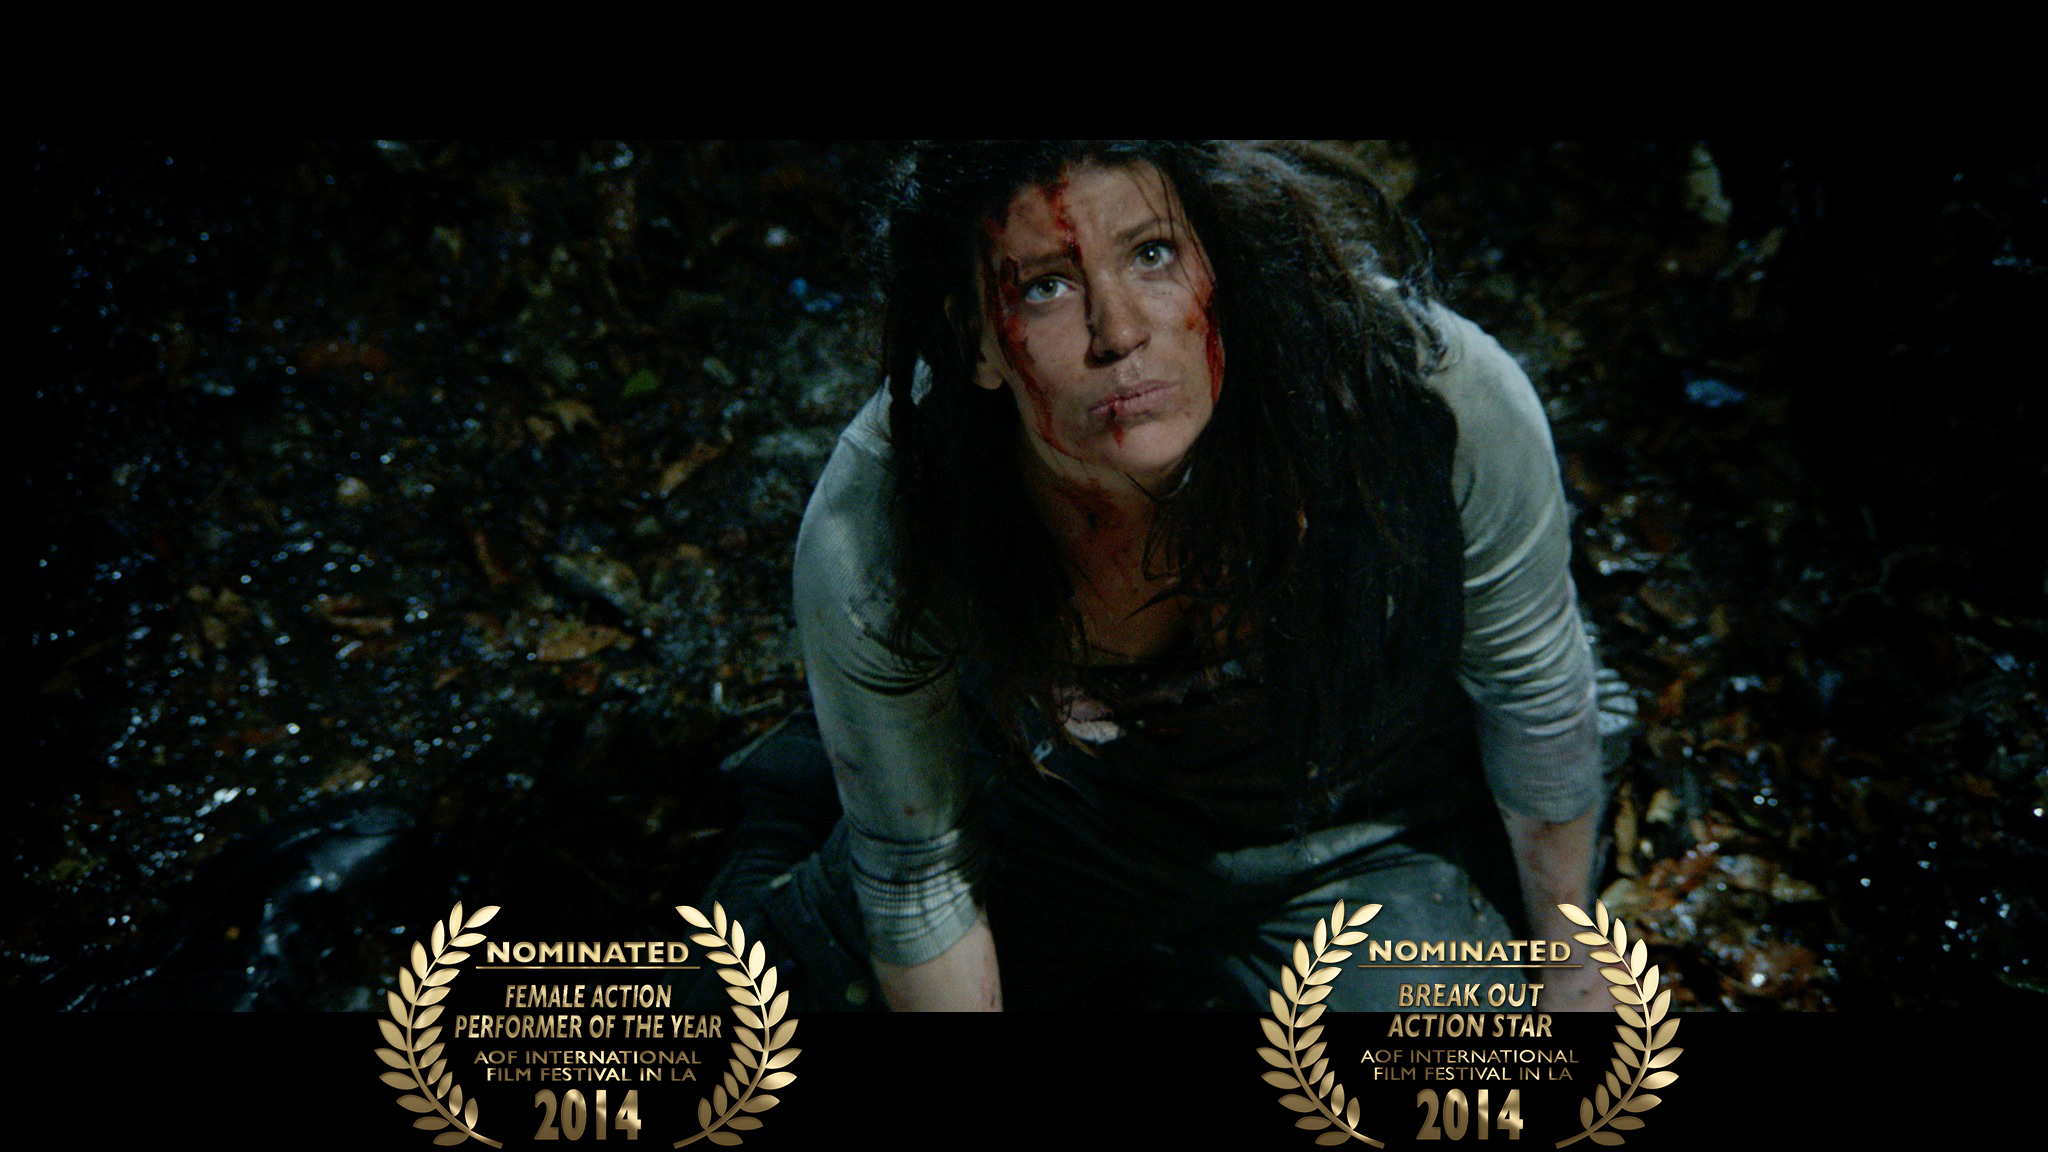 Still from REDEEM the Beginning. Nominated for Female Action Performer of the Year 2014 and Breakout Action Star.